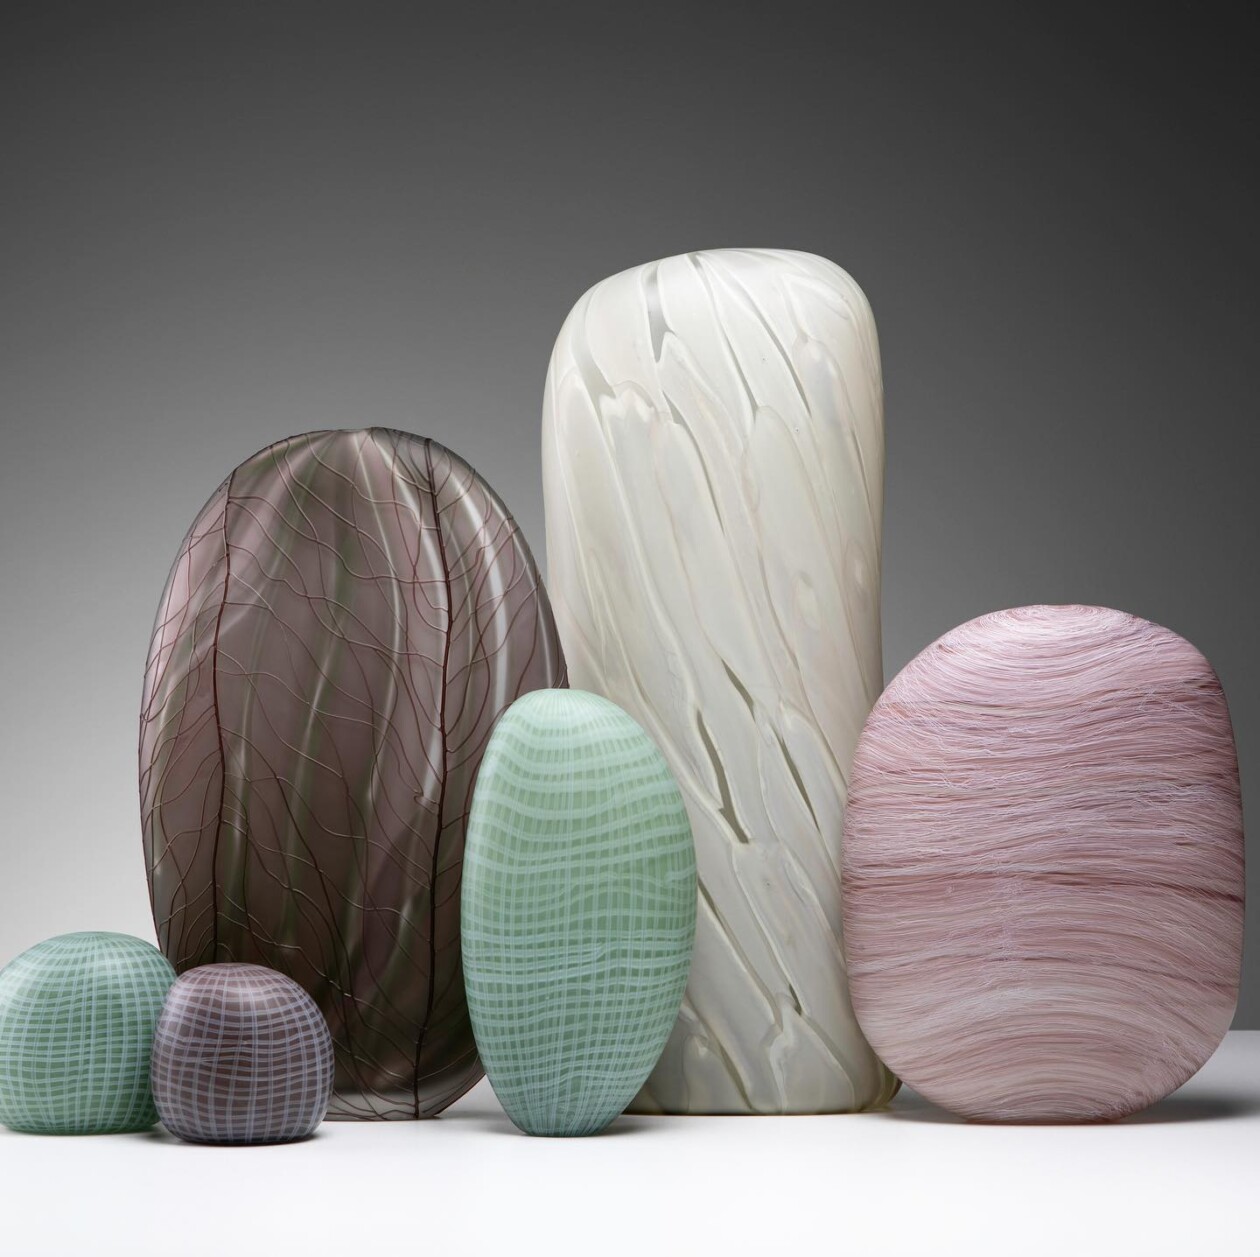 Beautiful And Innovative Abstract Glass Sculptures By Clare Belfrage 23